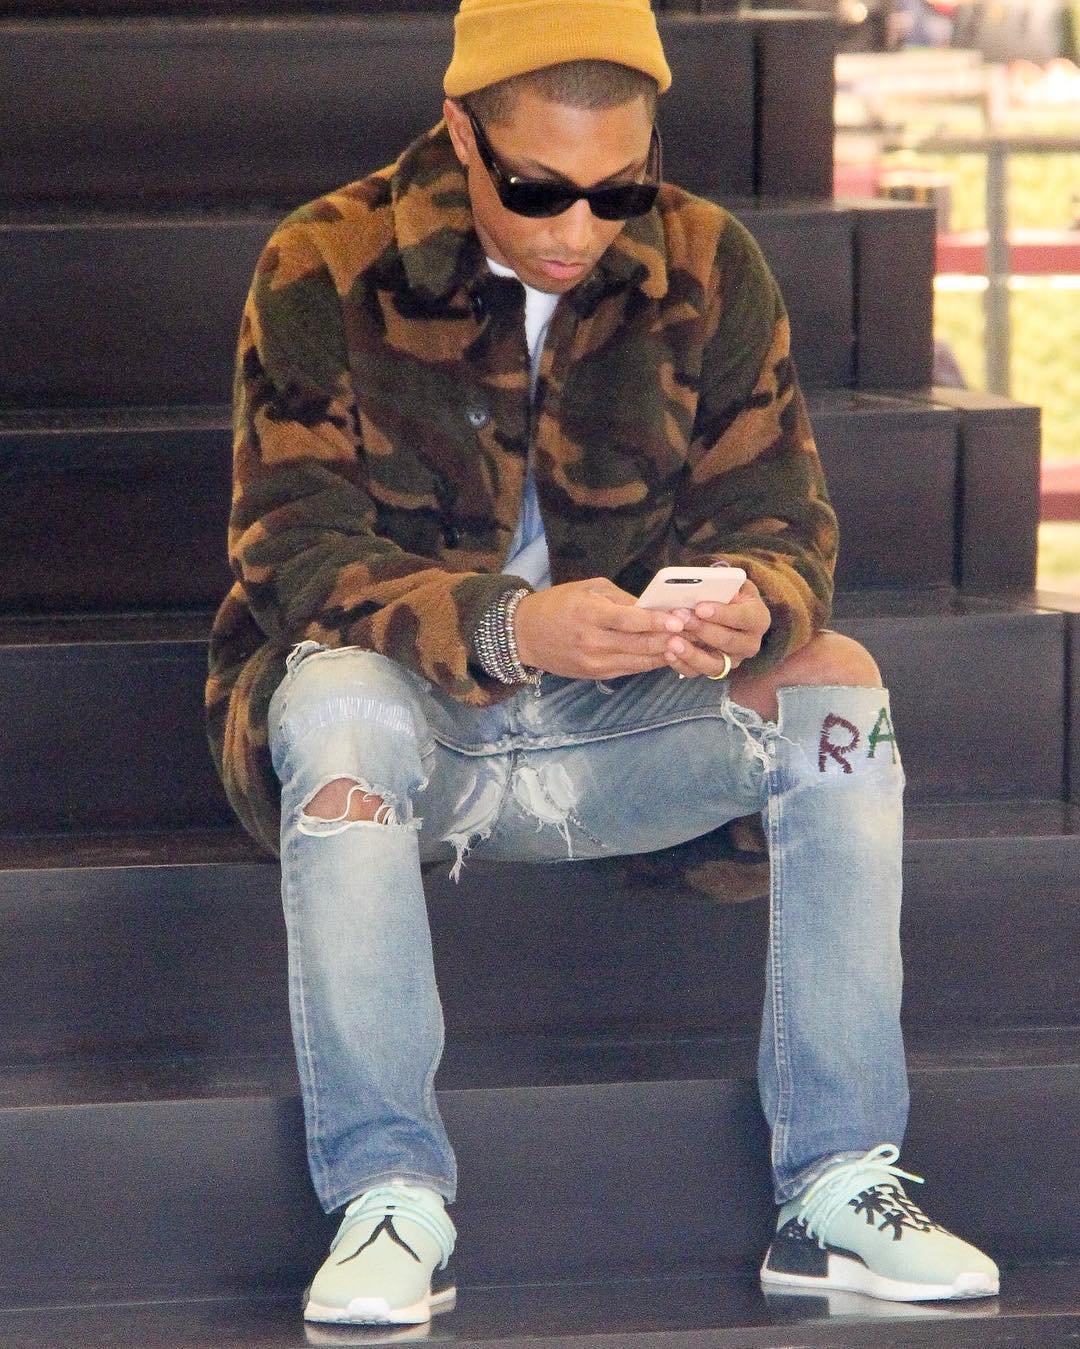 SPOTTED: Pharrell Williams In Camo Coat, Chanel Sunglasses And Adidas NMD's  – PAUSE Online